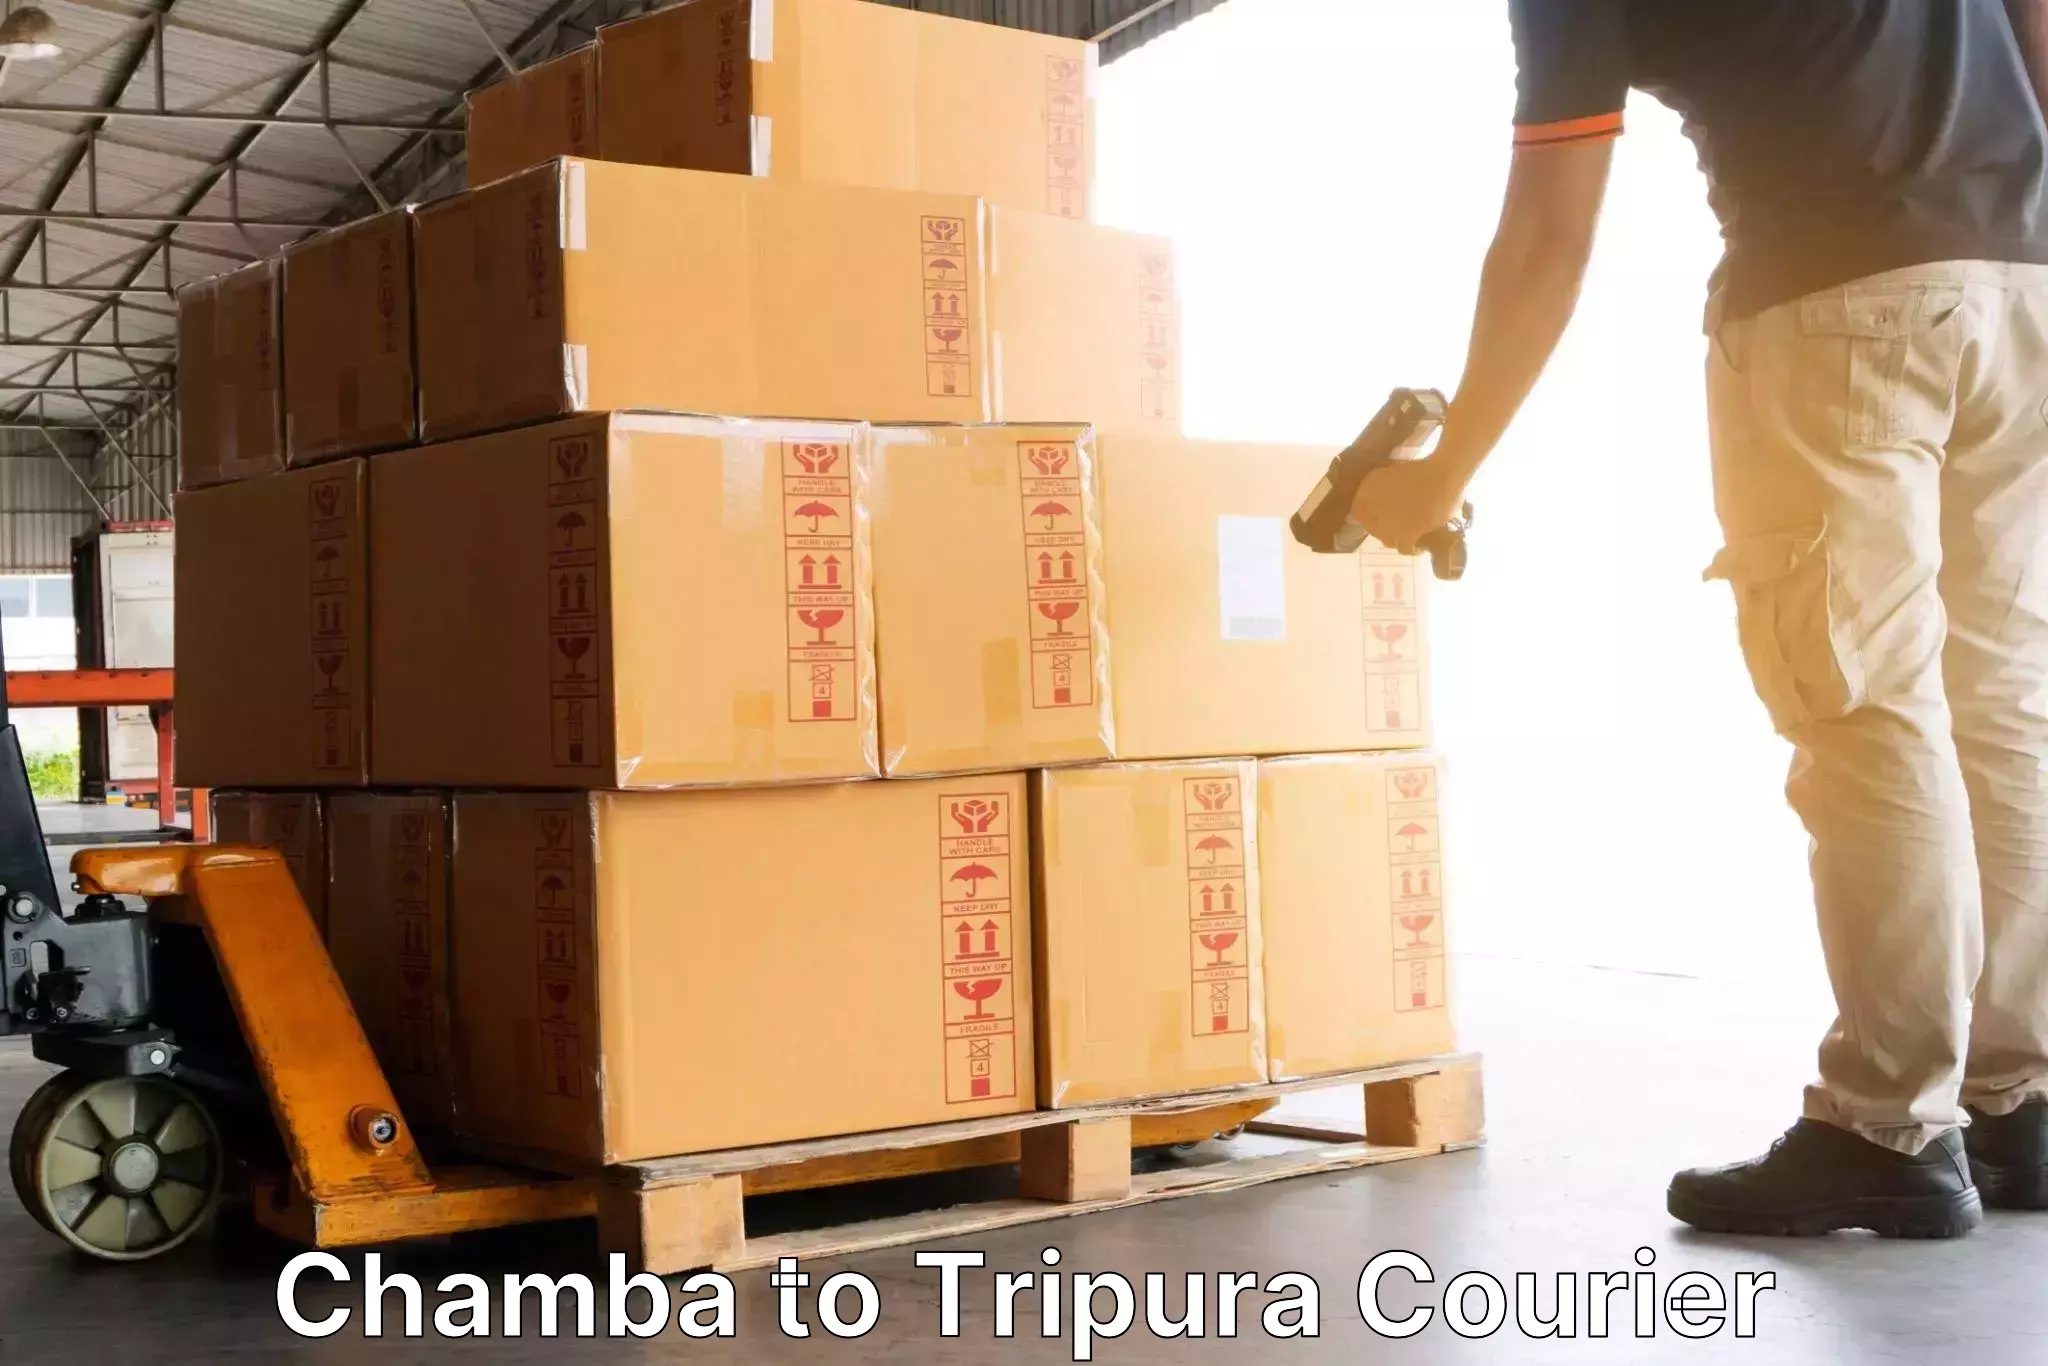 Subscription-based courier Chamba to Tripura